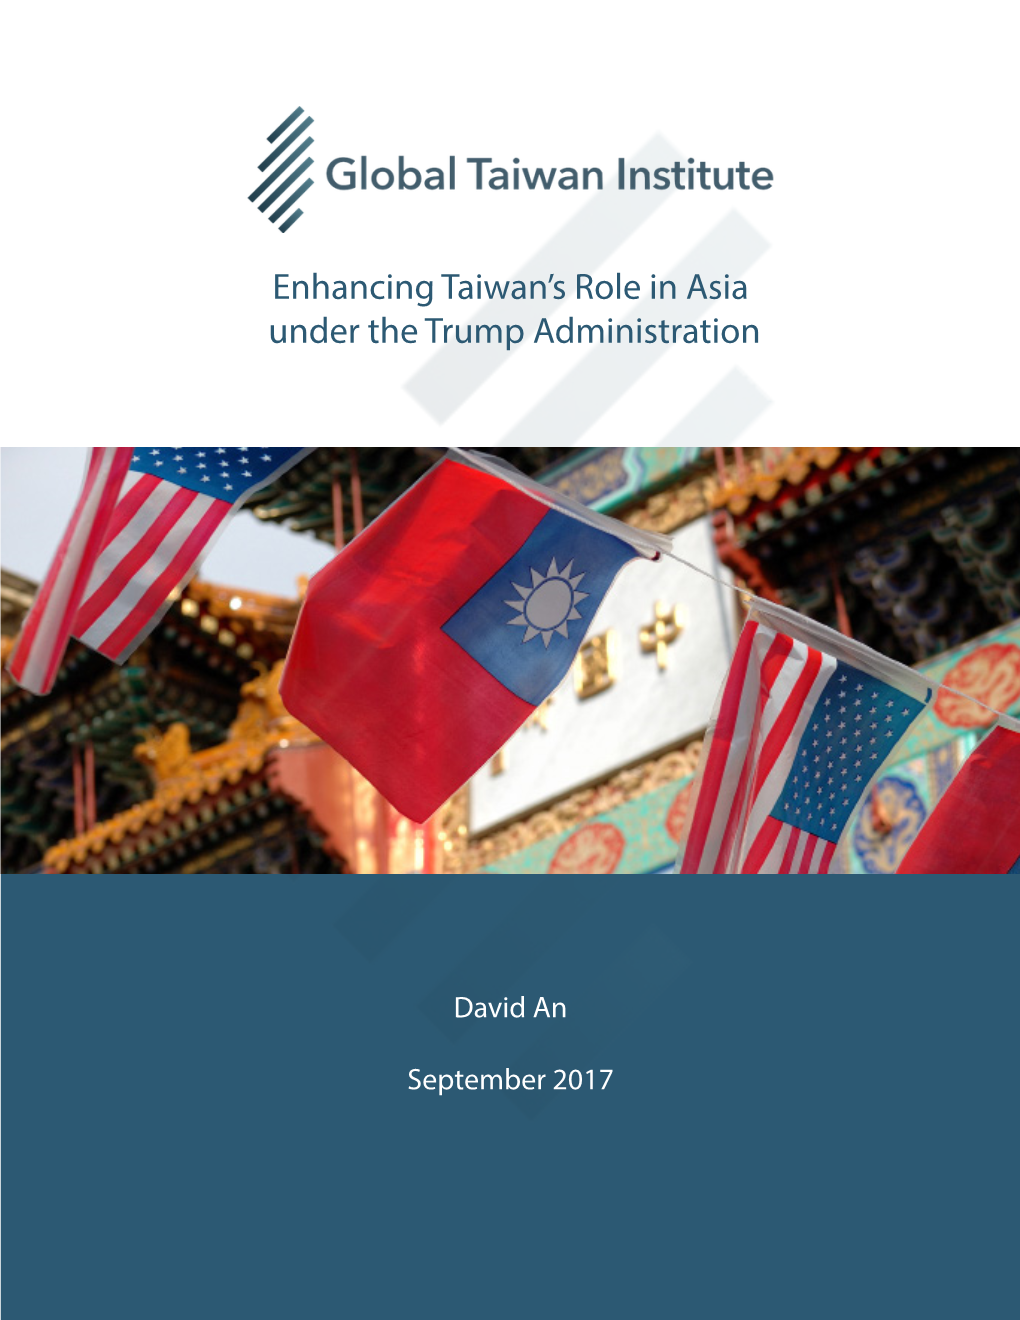 Enhancing Taiwan's Role in Asia Under the Trump Administration